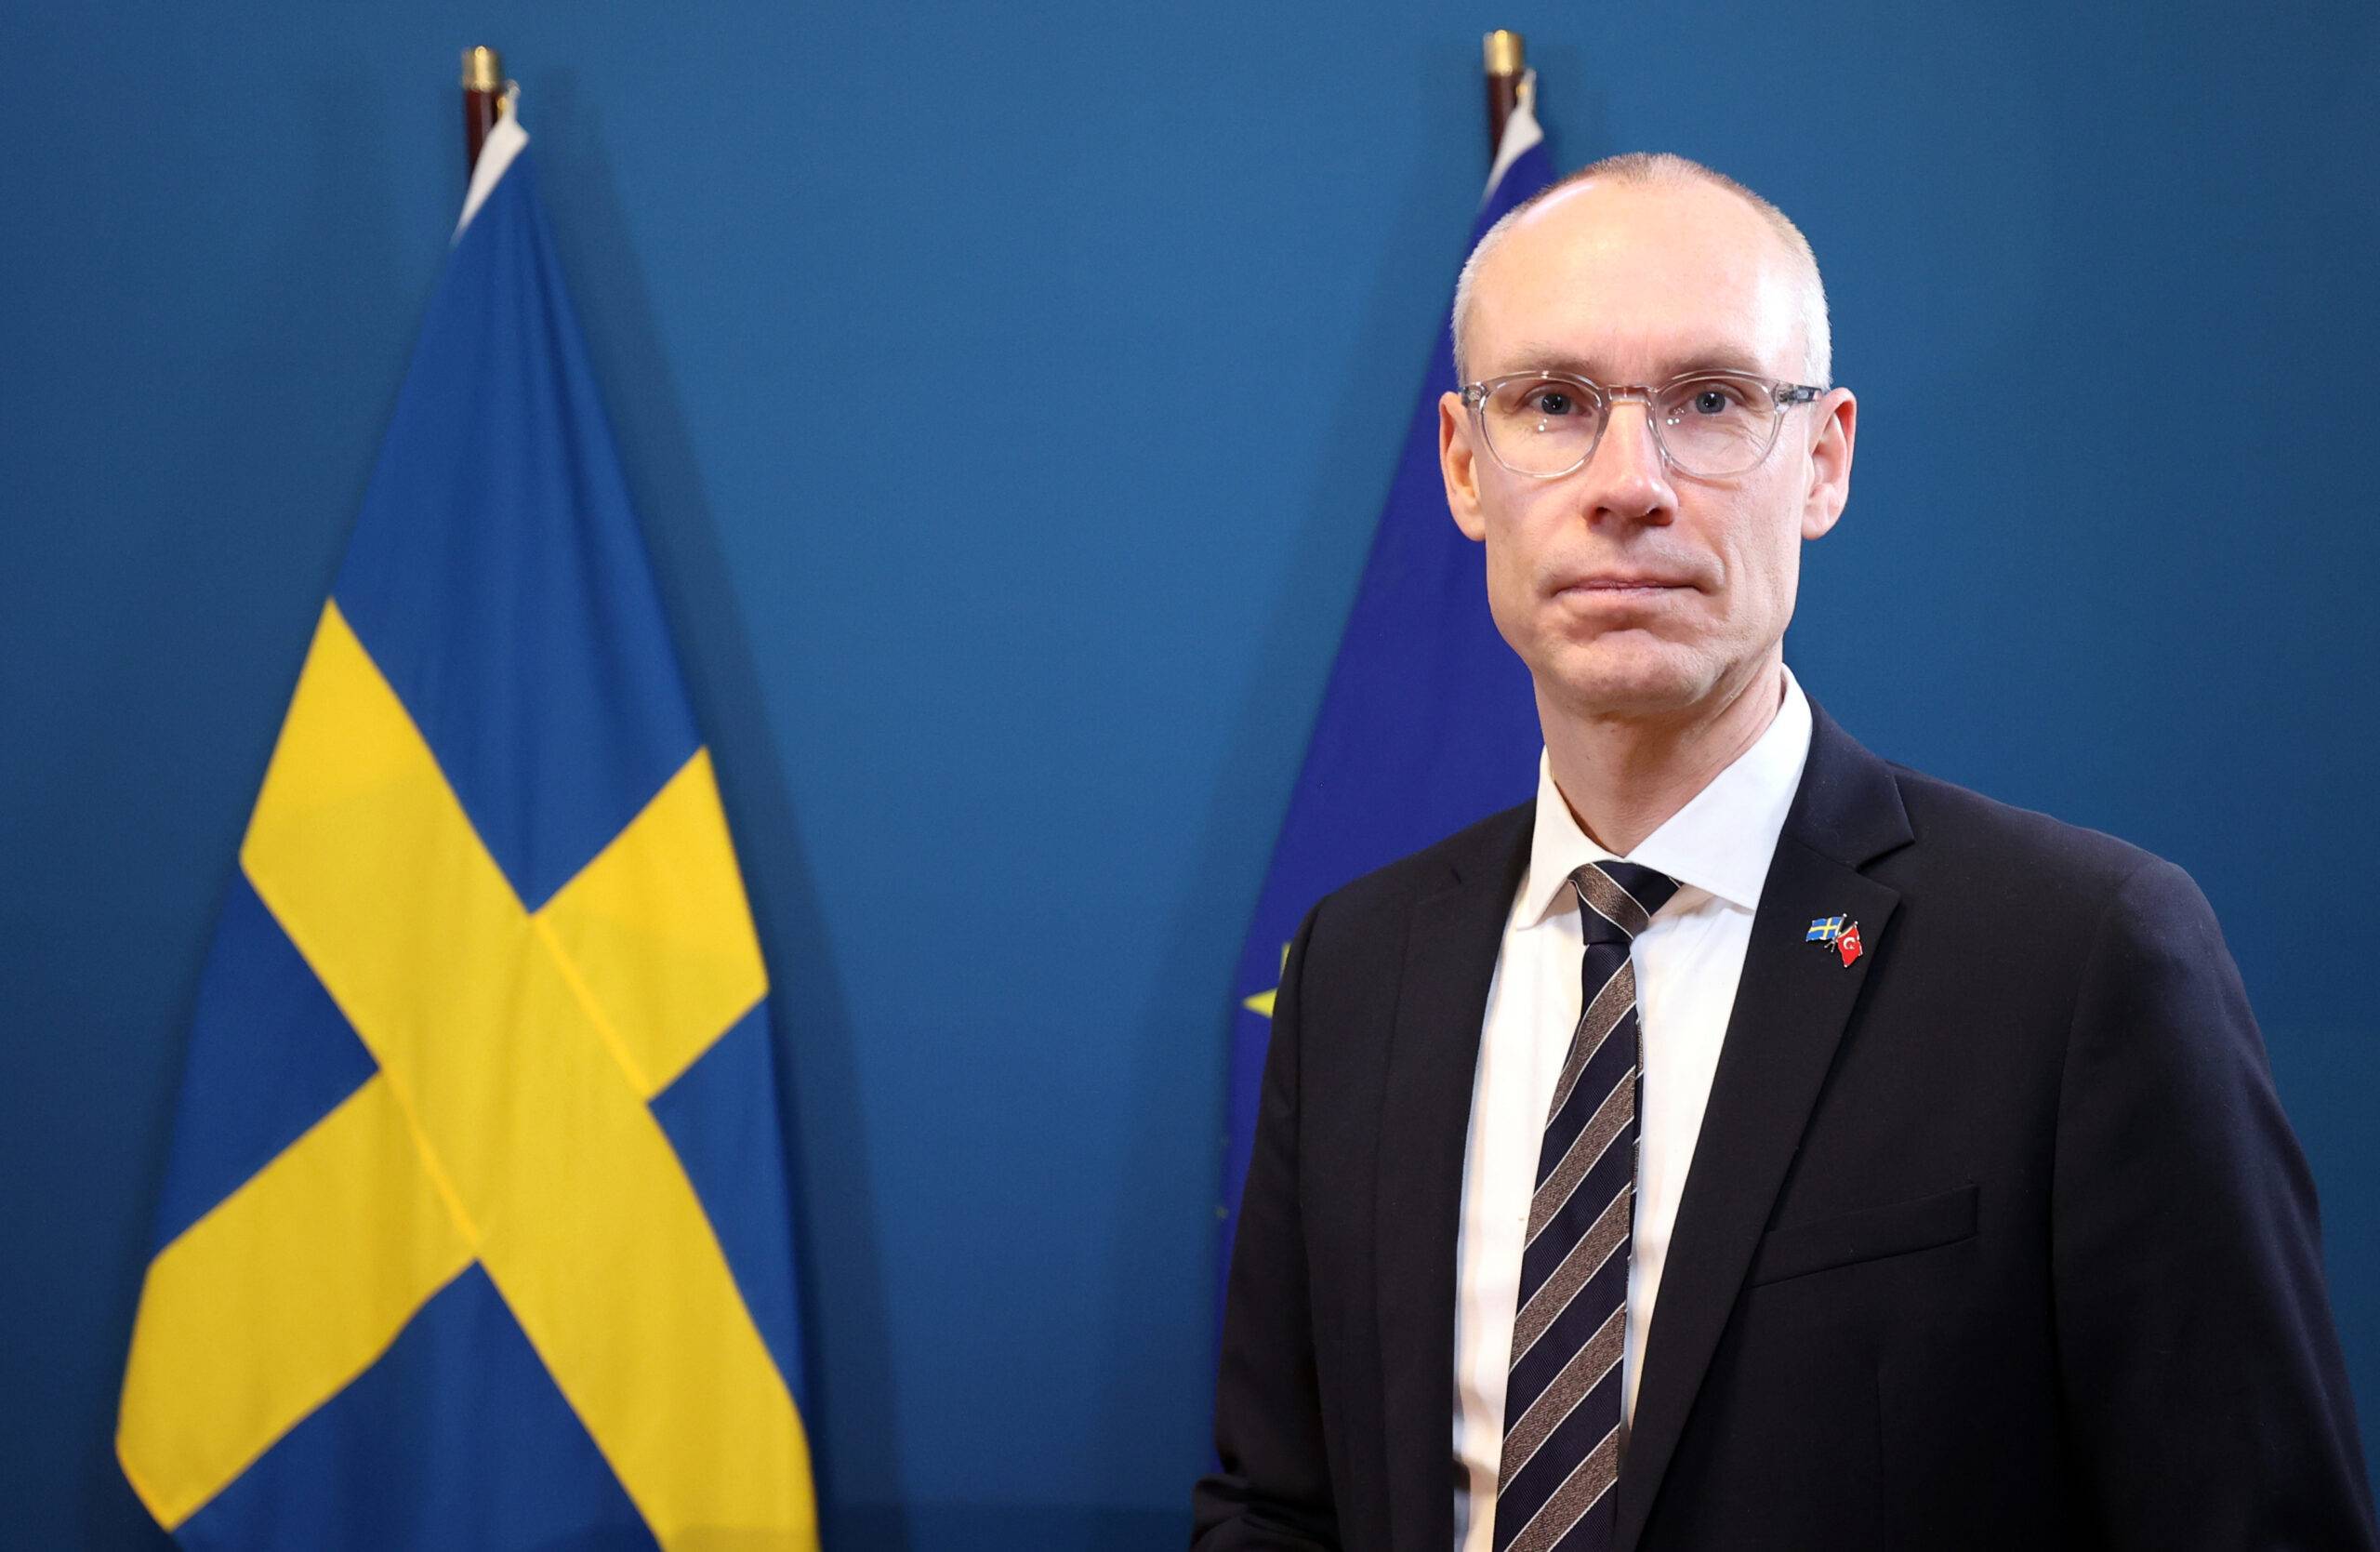 Ambassador in Swedish Prime Minister's Office for NATO-Negotiations Oscar Stenstrom speaks during an exclusive interview with Anadolu Agency in Stockholm, Sweden on 6 December, 2022 [Dursun Aydemir/Anadolu Agency]